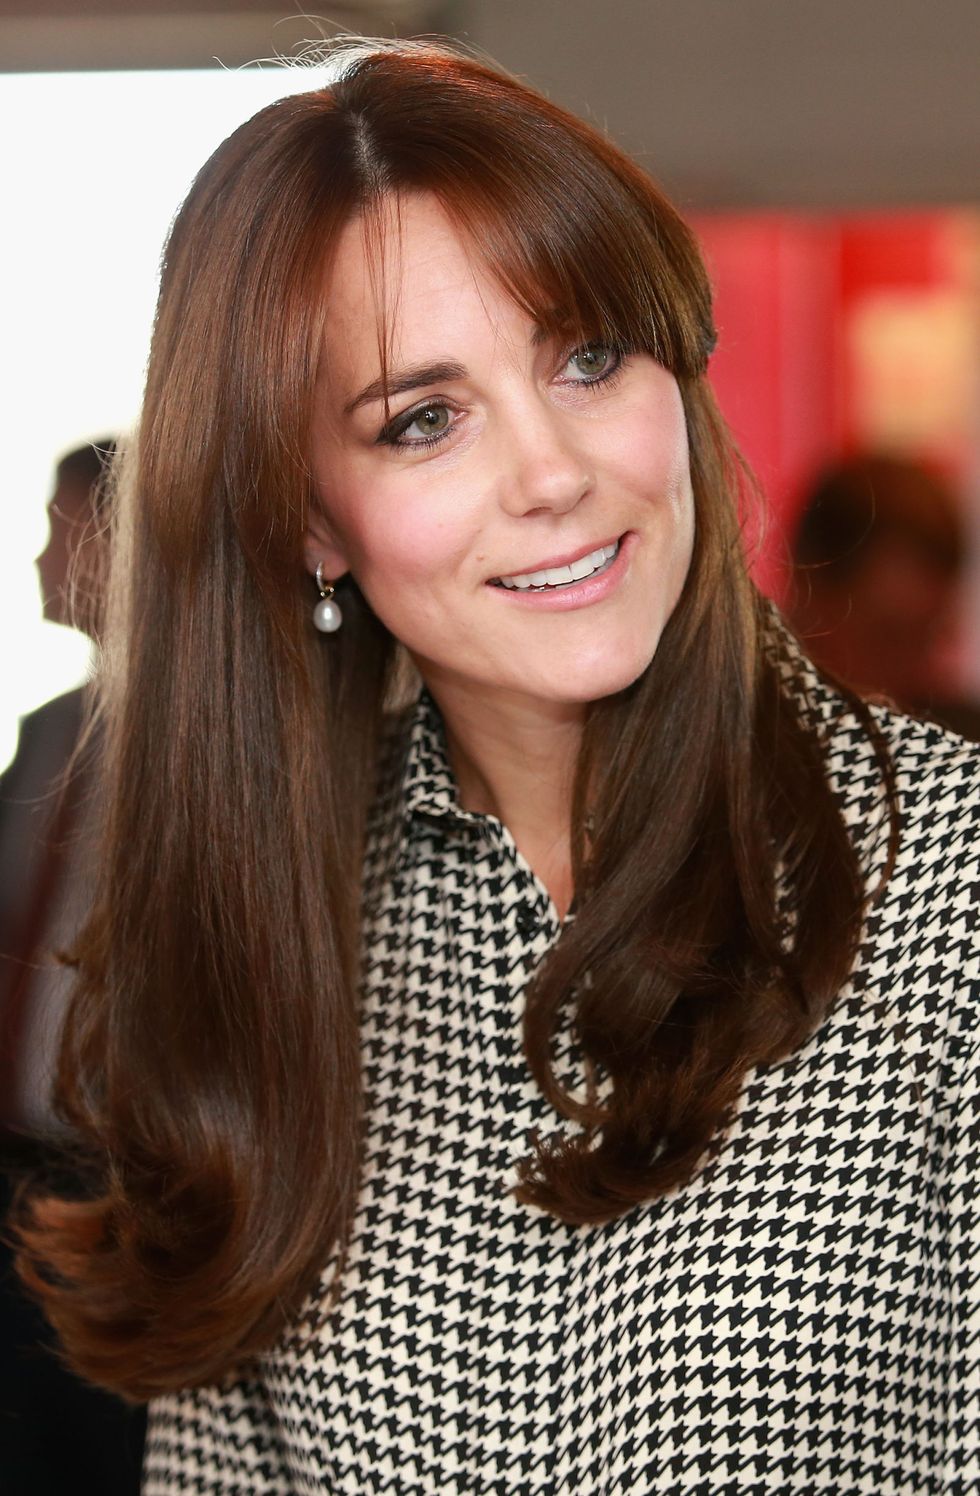 LONDON, ENGLAND - SEPTEMBER 17:  Catherine, Duchess of Cambridge visits the Anna Freud Centre on September 17, 2015 in London, England. The visit was for the Duchess to see how the charity is working to lead a step change in children's and young people's mental health care.  (Photo by Chris Jackson - WPA Pool /Getty Images)